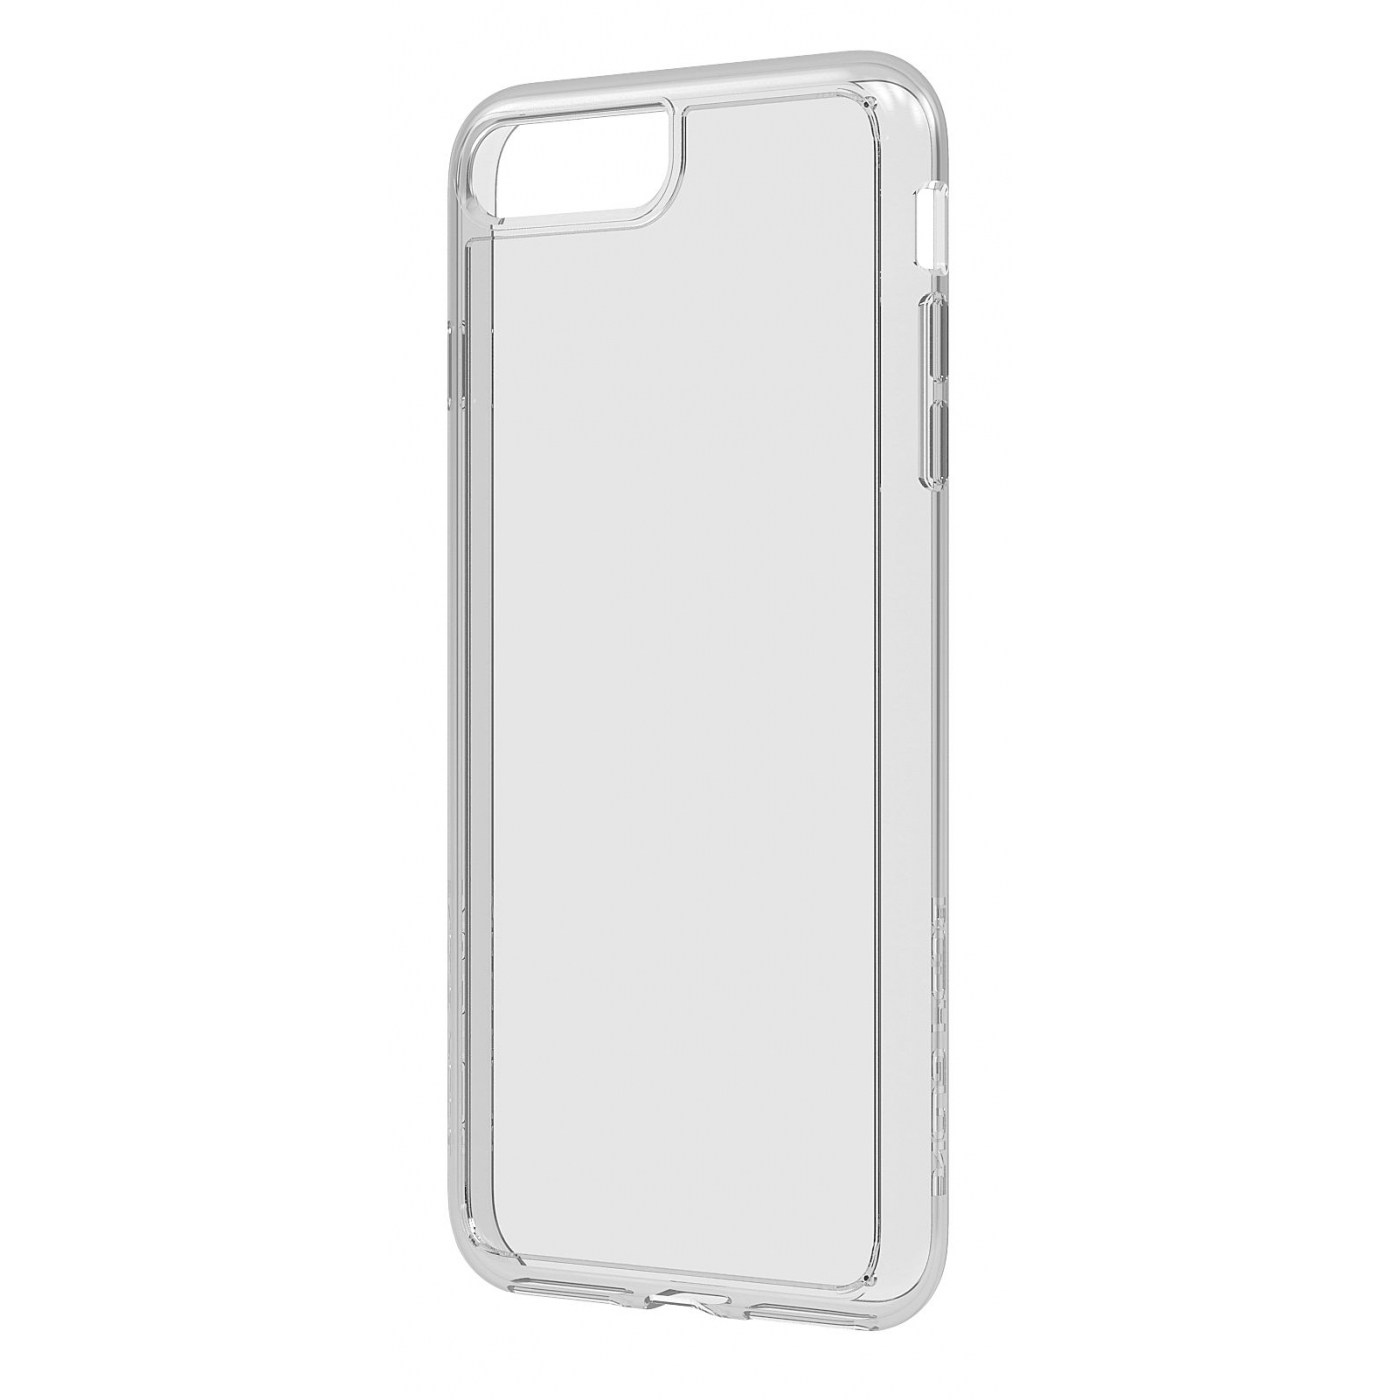 Body Glove Ghost Case for iPhone 7 – Clear